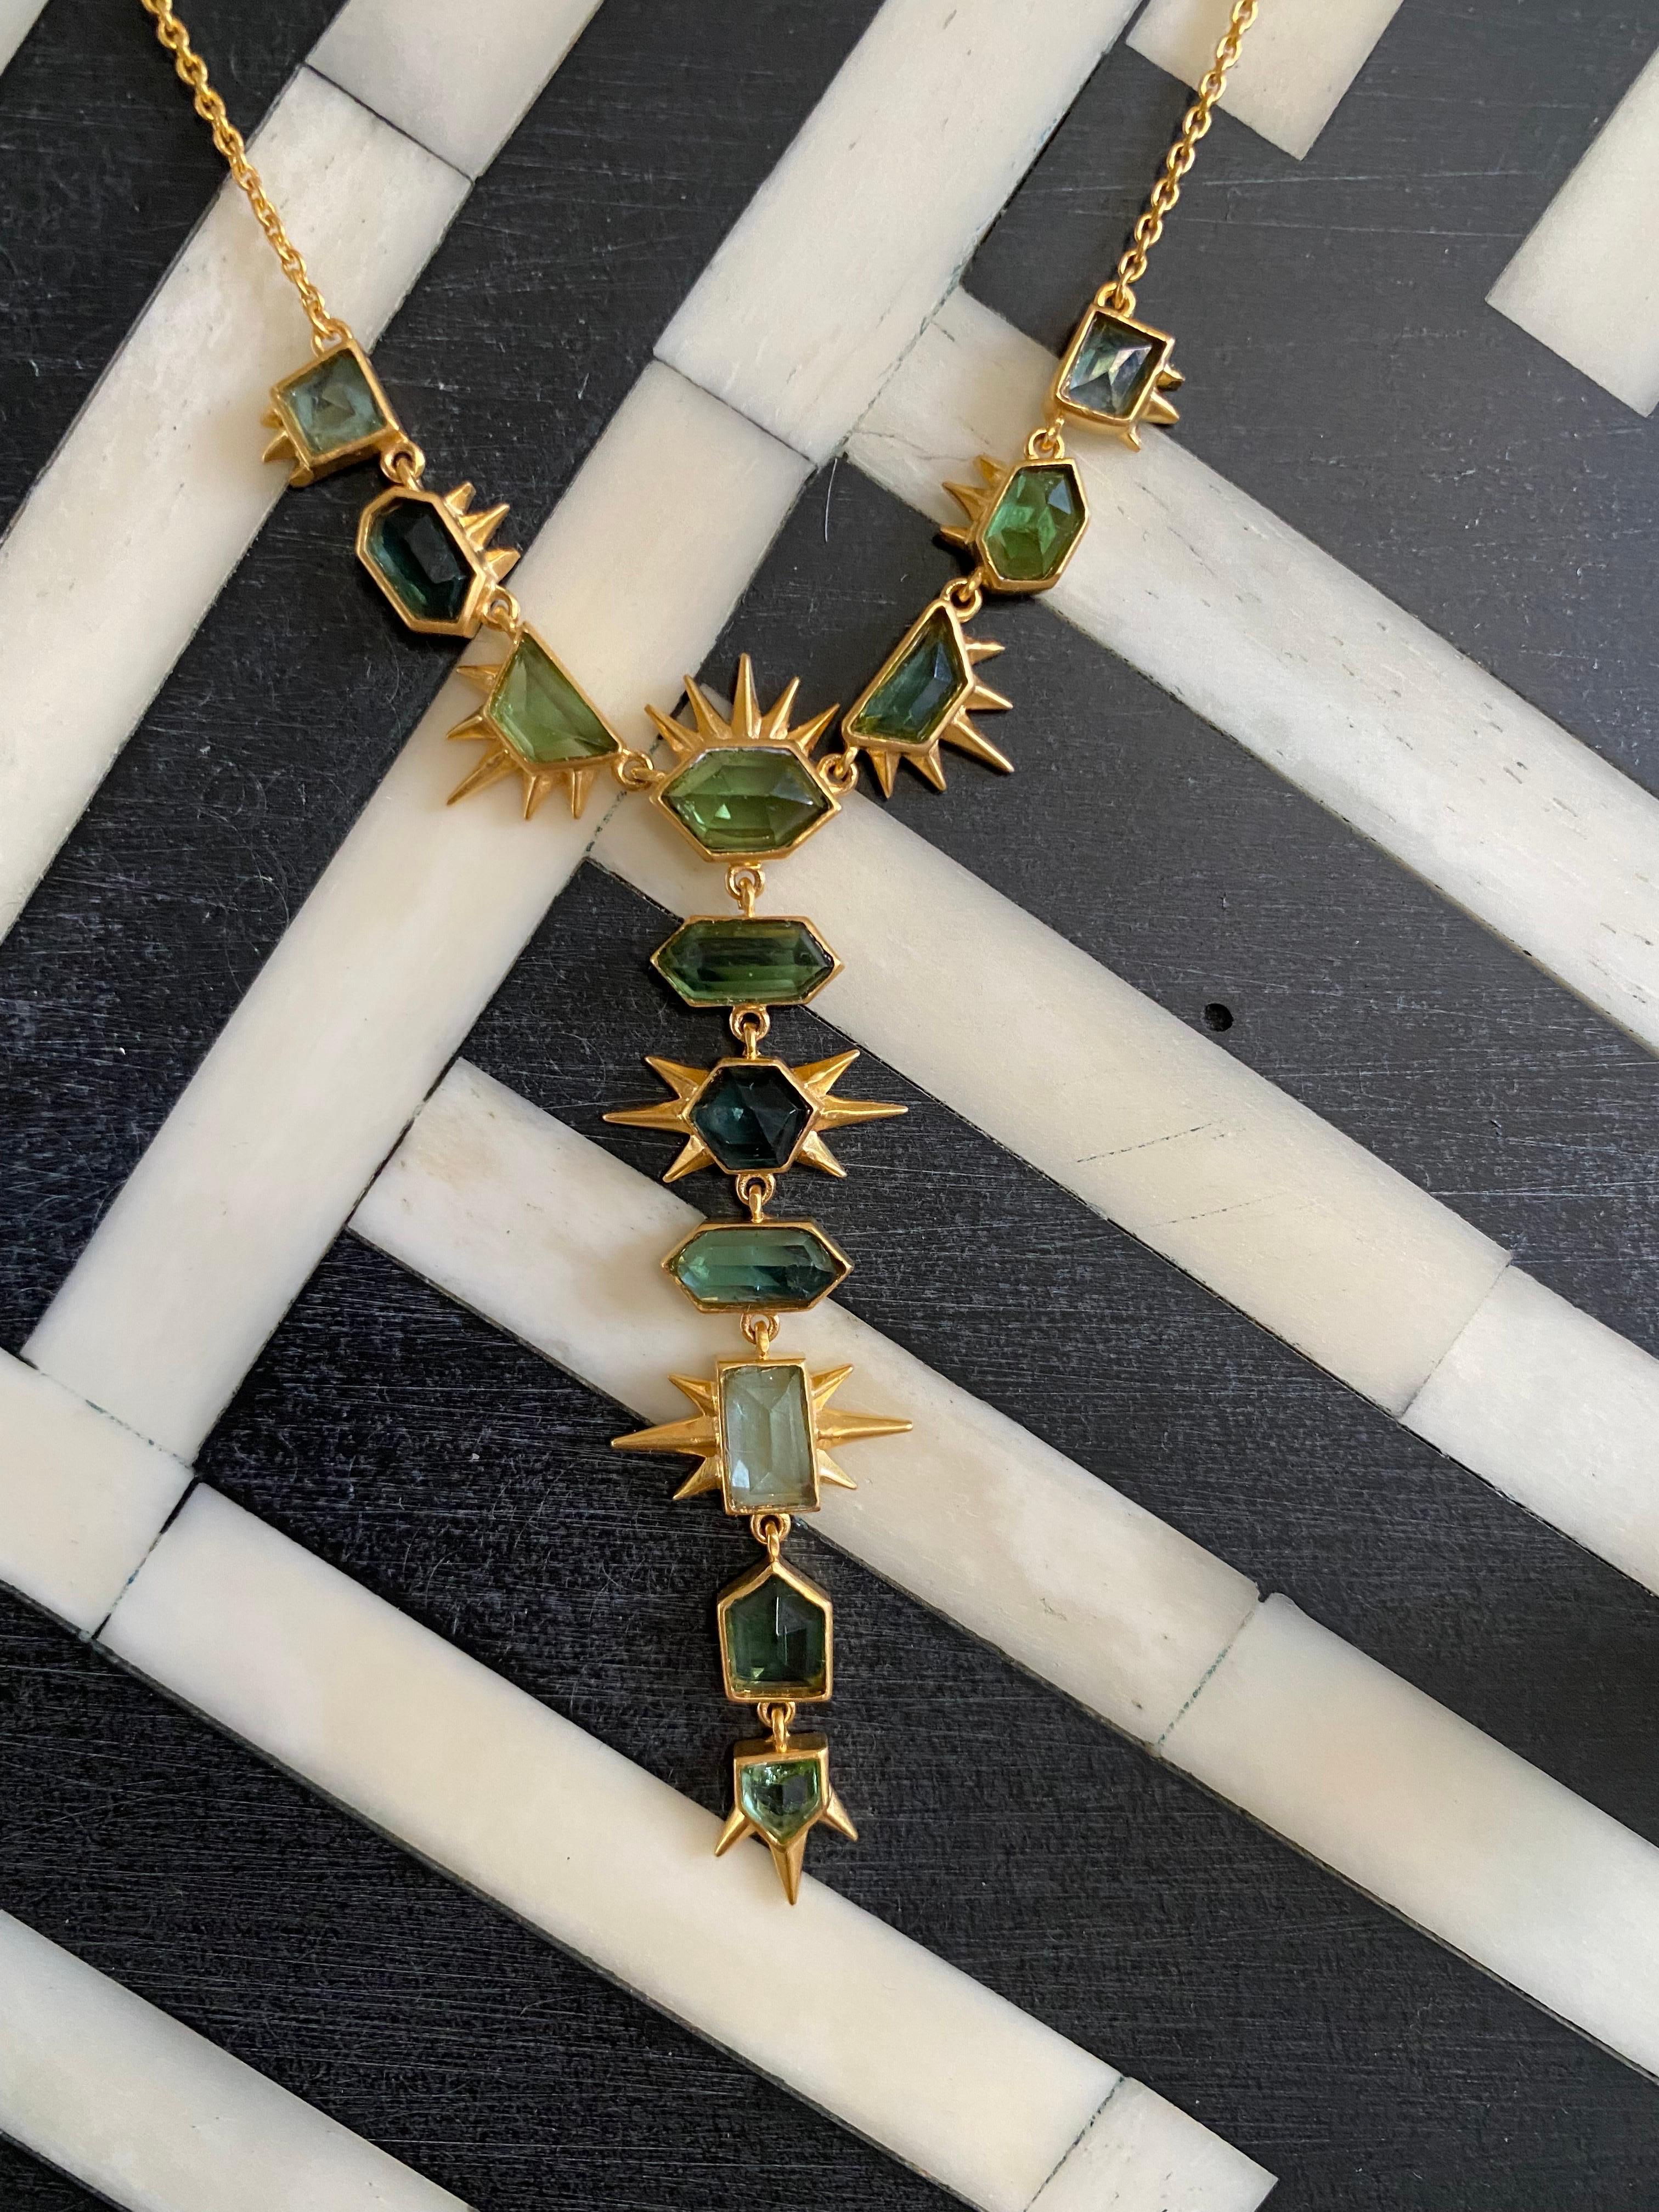 6.91 Carats Green Tourmaline and 18kt Gold Necklace by Lauren Harper For Sale 3